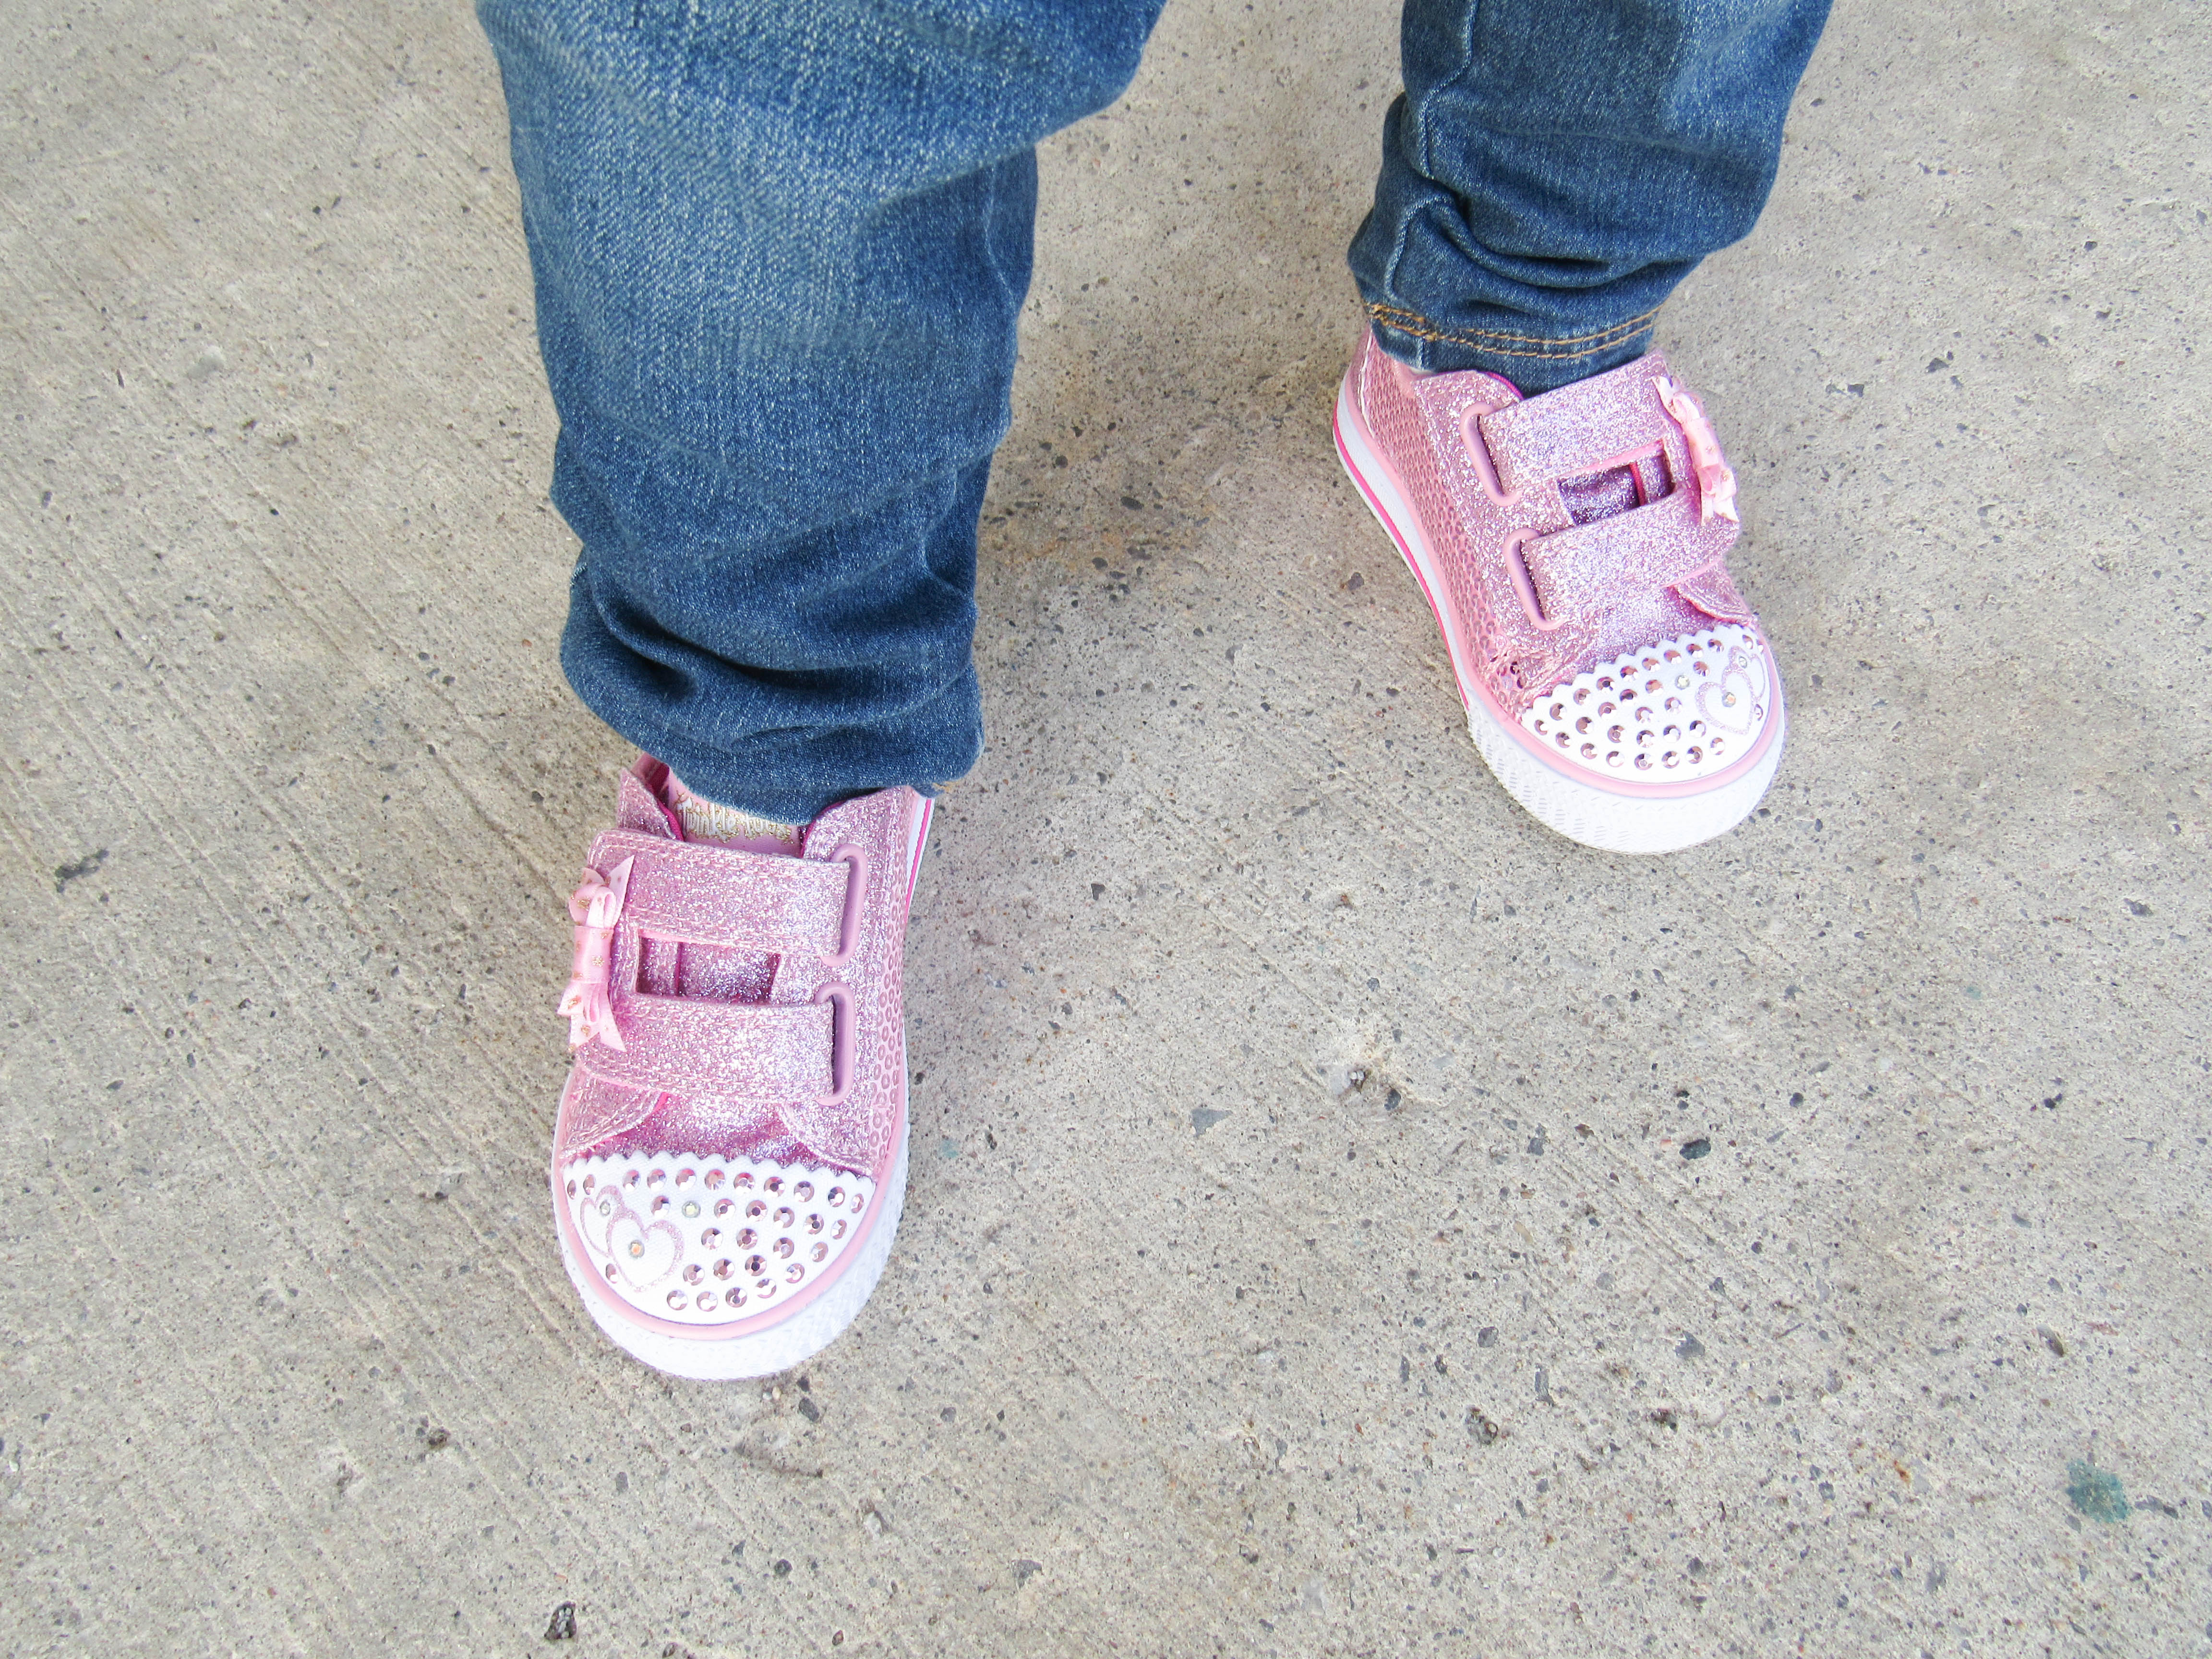 Back-to-School Shoes for Girls from Sears